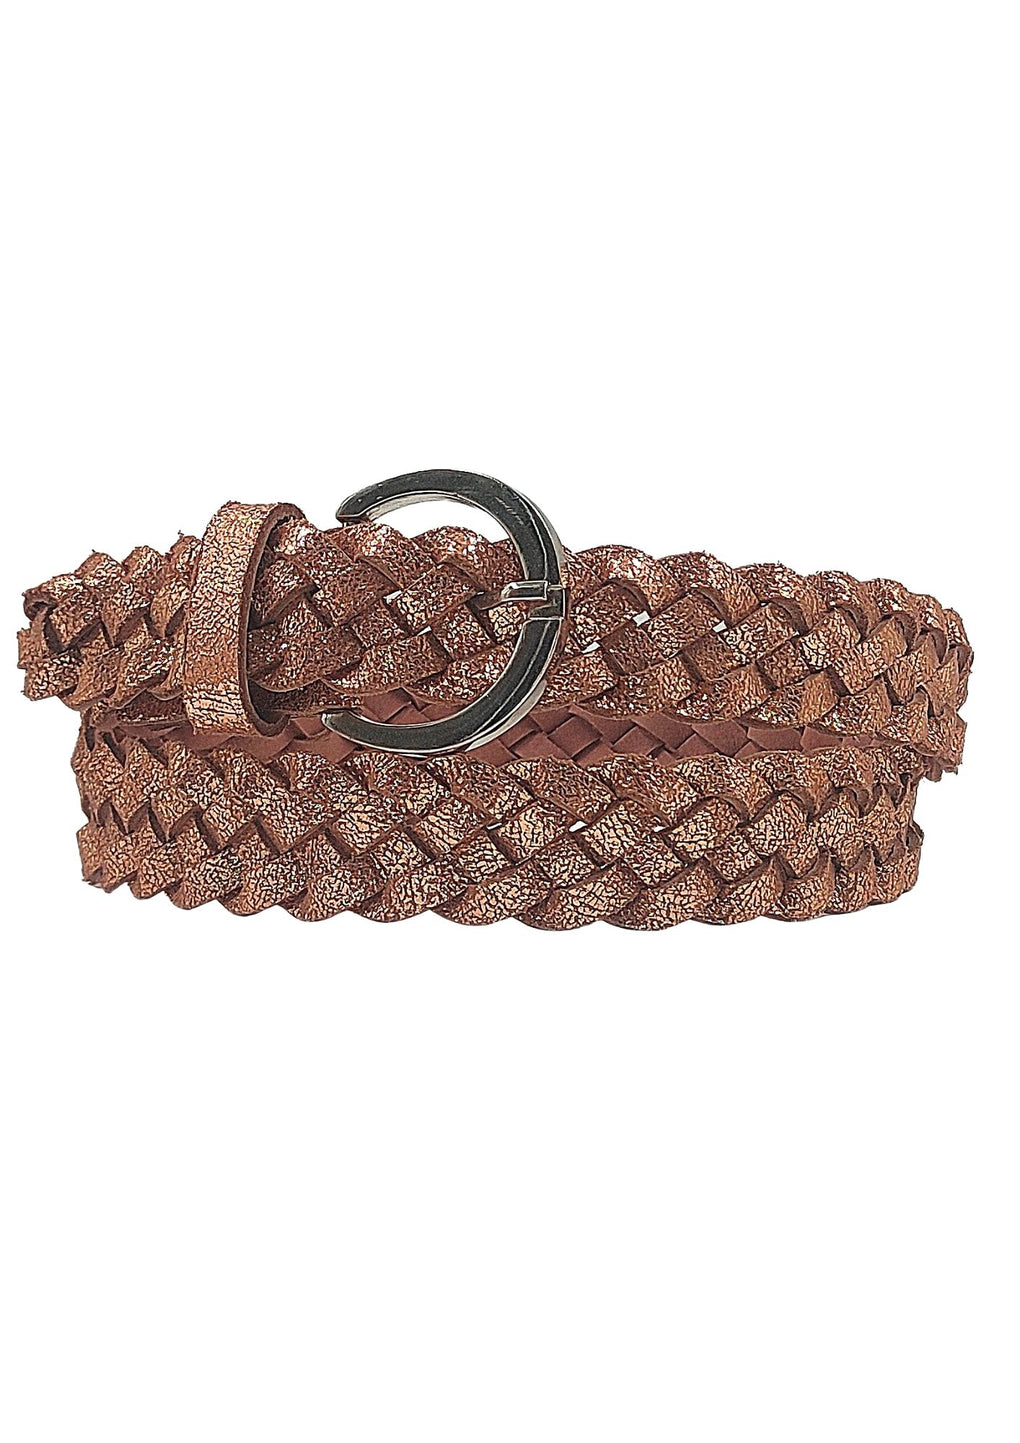 Shiny Braided Leather Belt With Silver Buckle (LB-1020_Bronze)